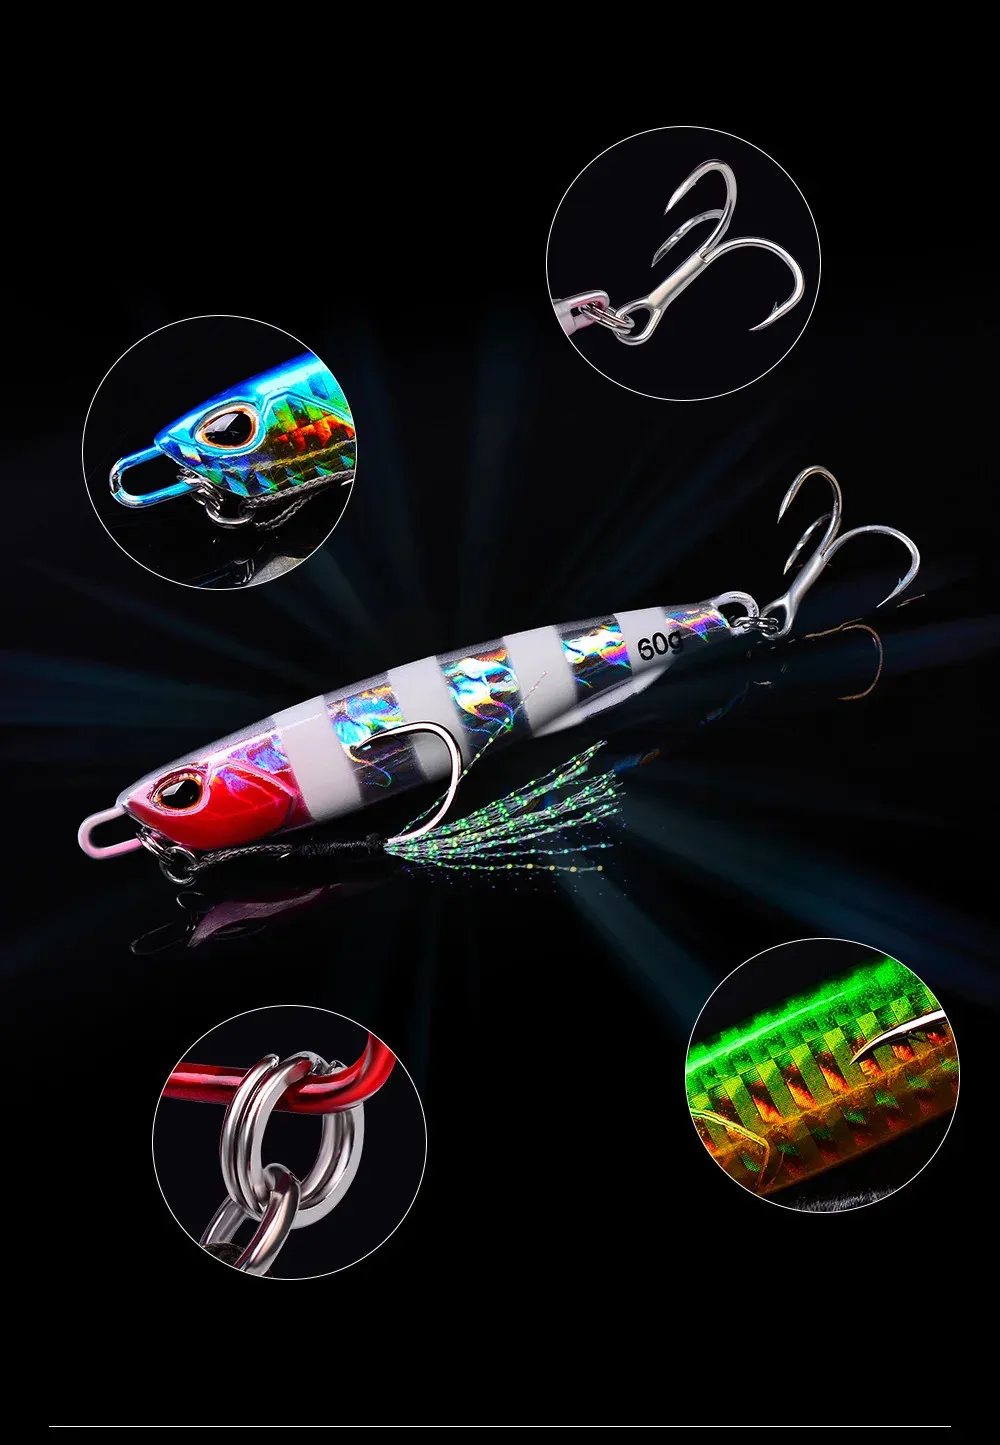 Jigging Lure Set Fishing Lures Metal Spinner Spoon Fish Bait Jigs Japan Fishing  Tackle Pesca Bass Tuna Trout 231226 From Men06, $11.39